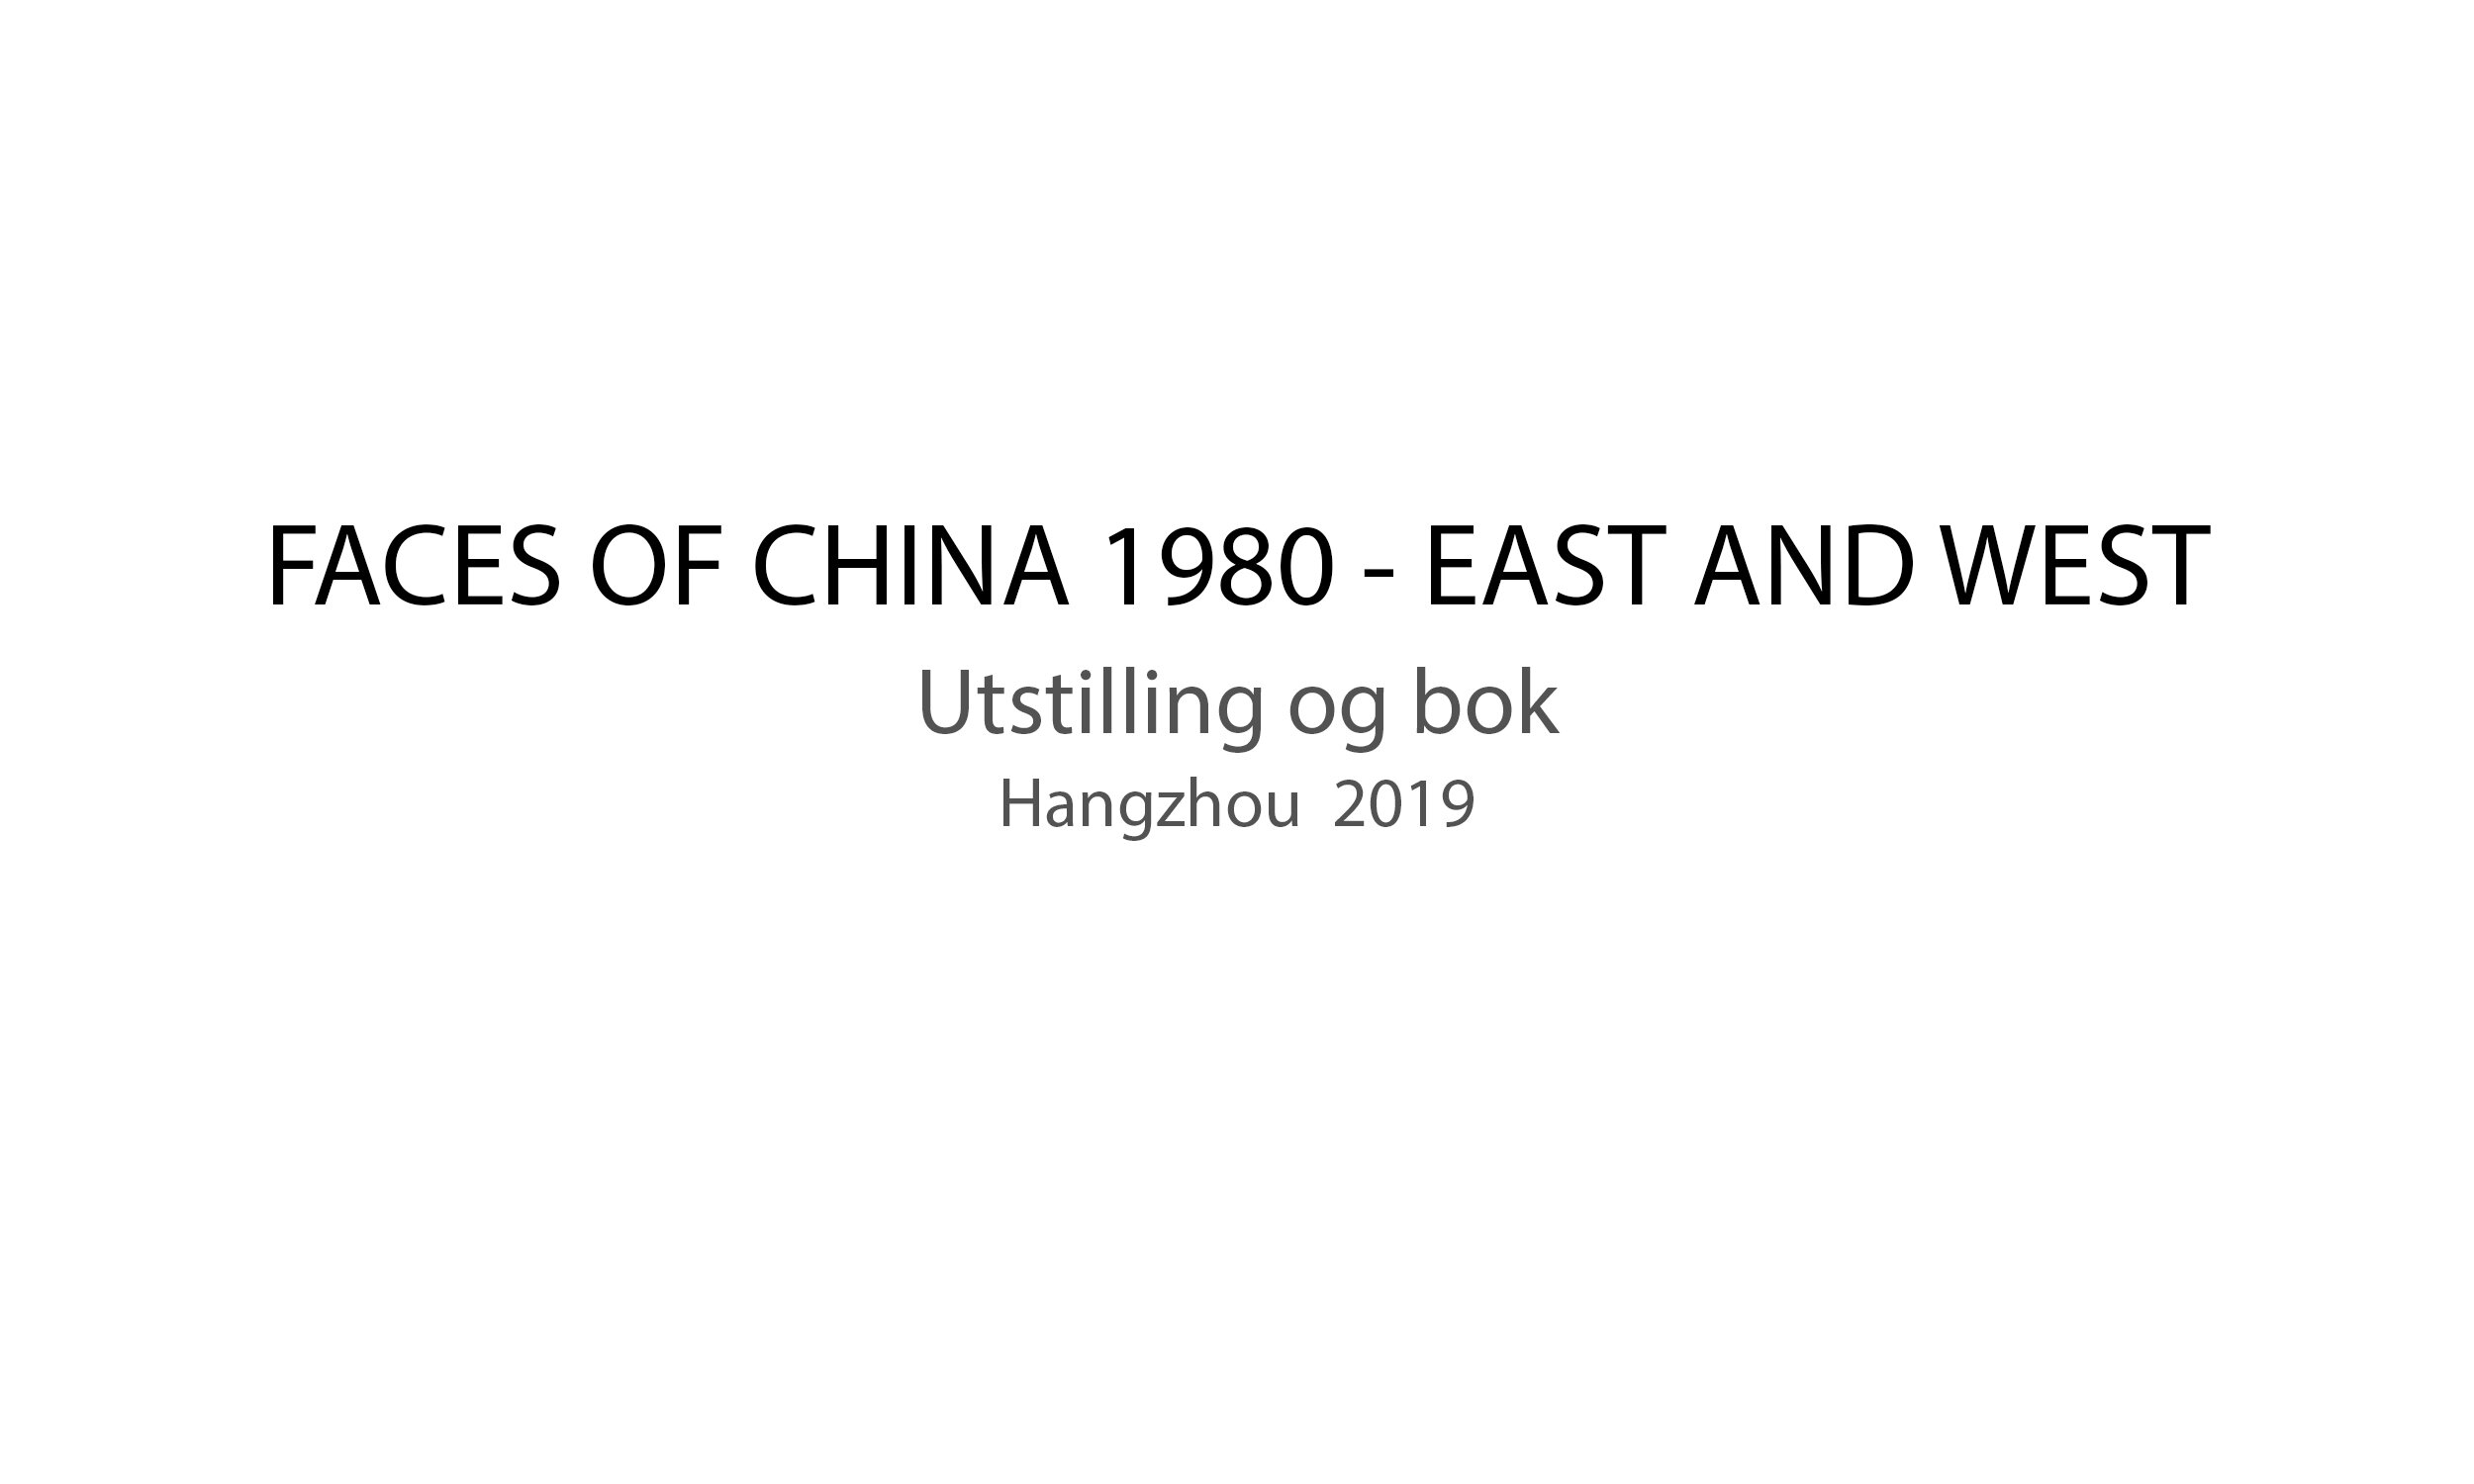 Kina Utstilling FACES OF CHINA 1980 - EAST AND WEST.jpg